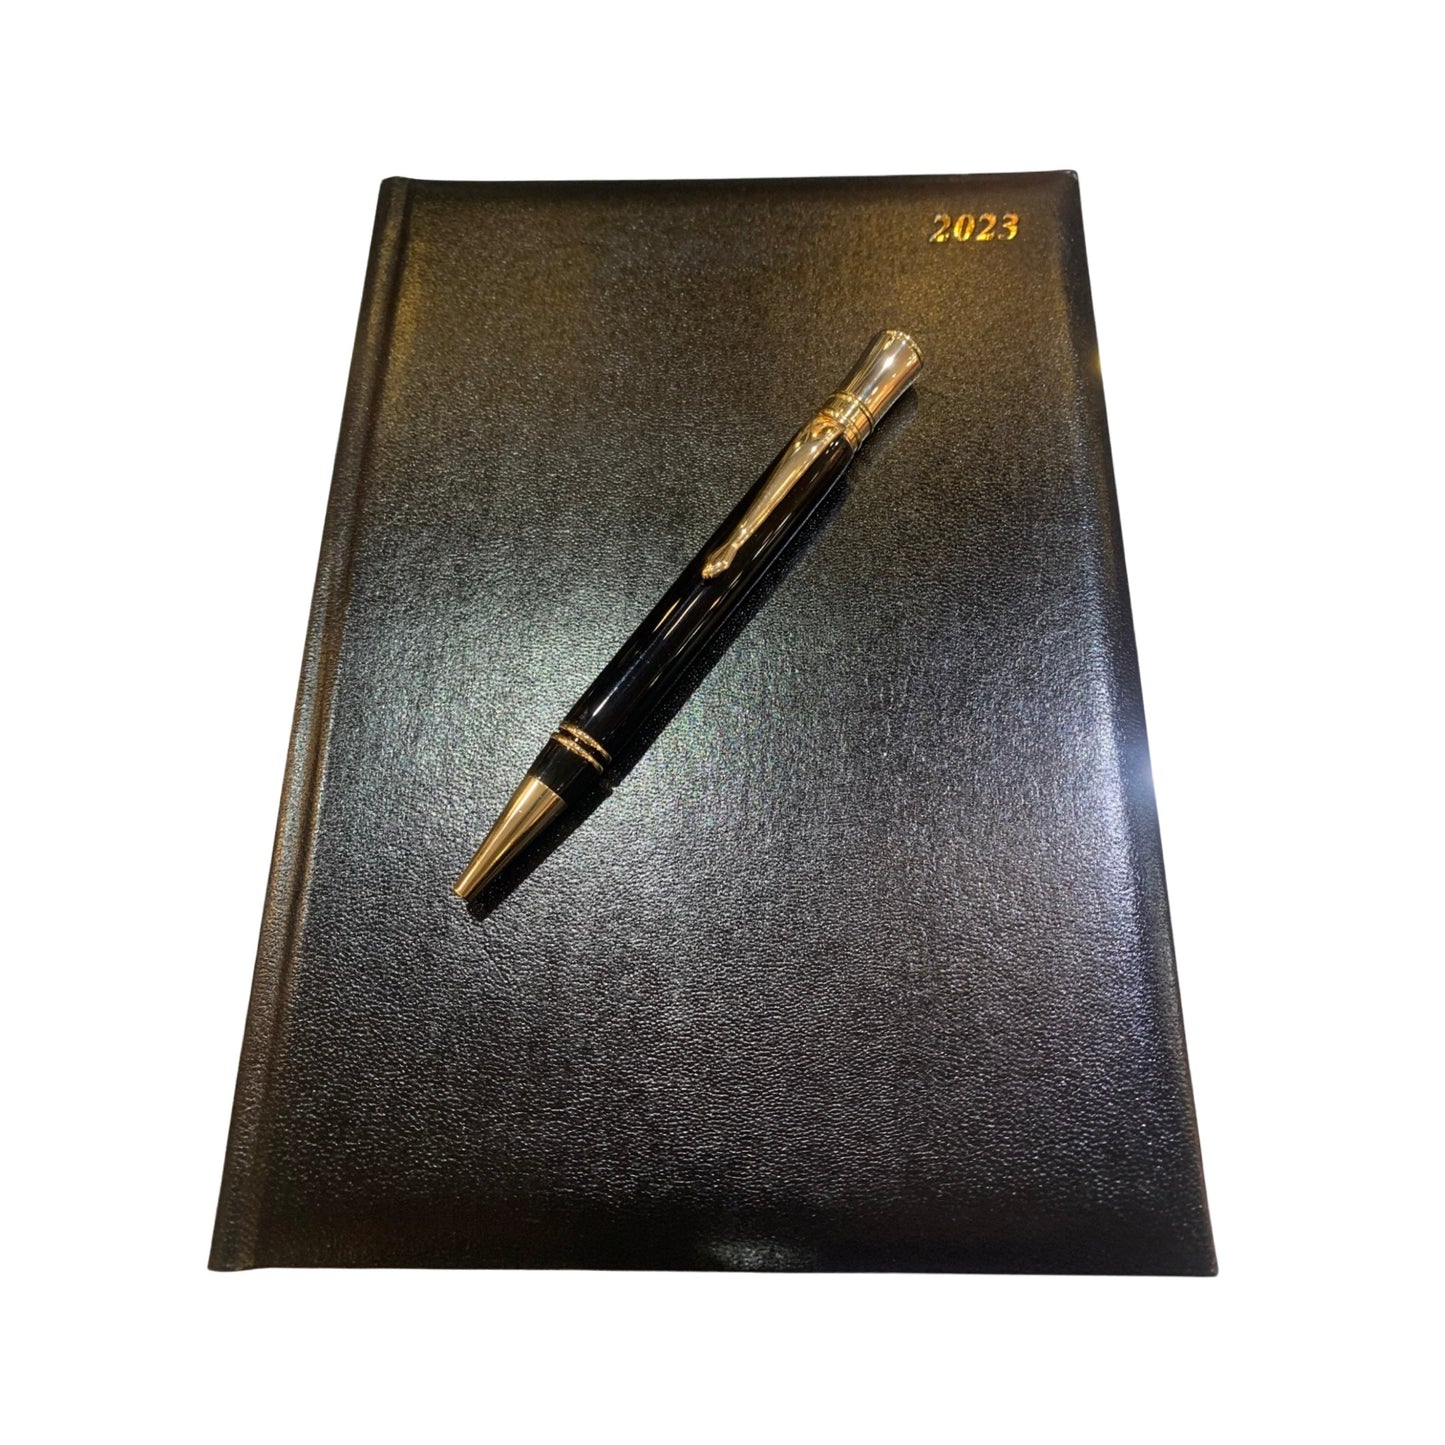 Dr. Monah | Bespoke Desk Diary, Journal, Writing Instrument | 8 x 6" | One Day Per Page | D186S